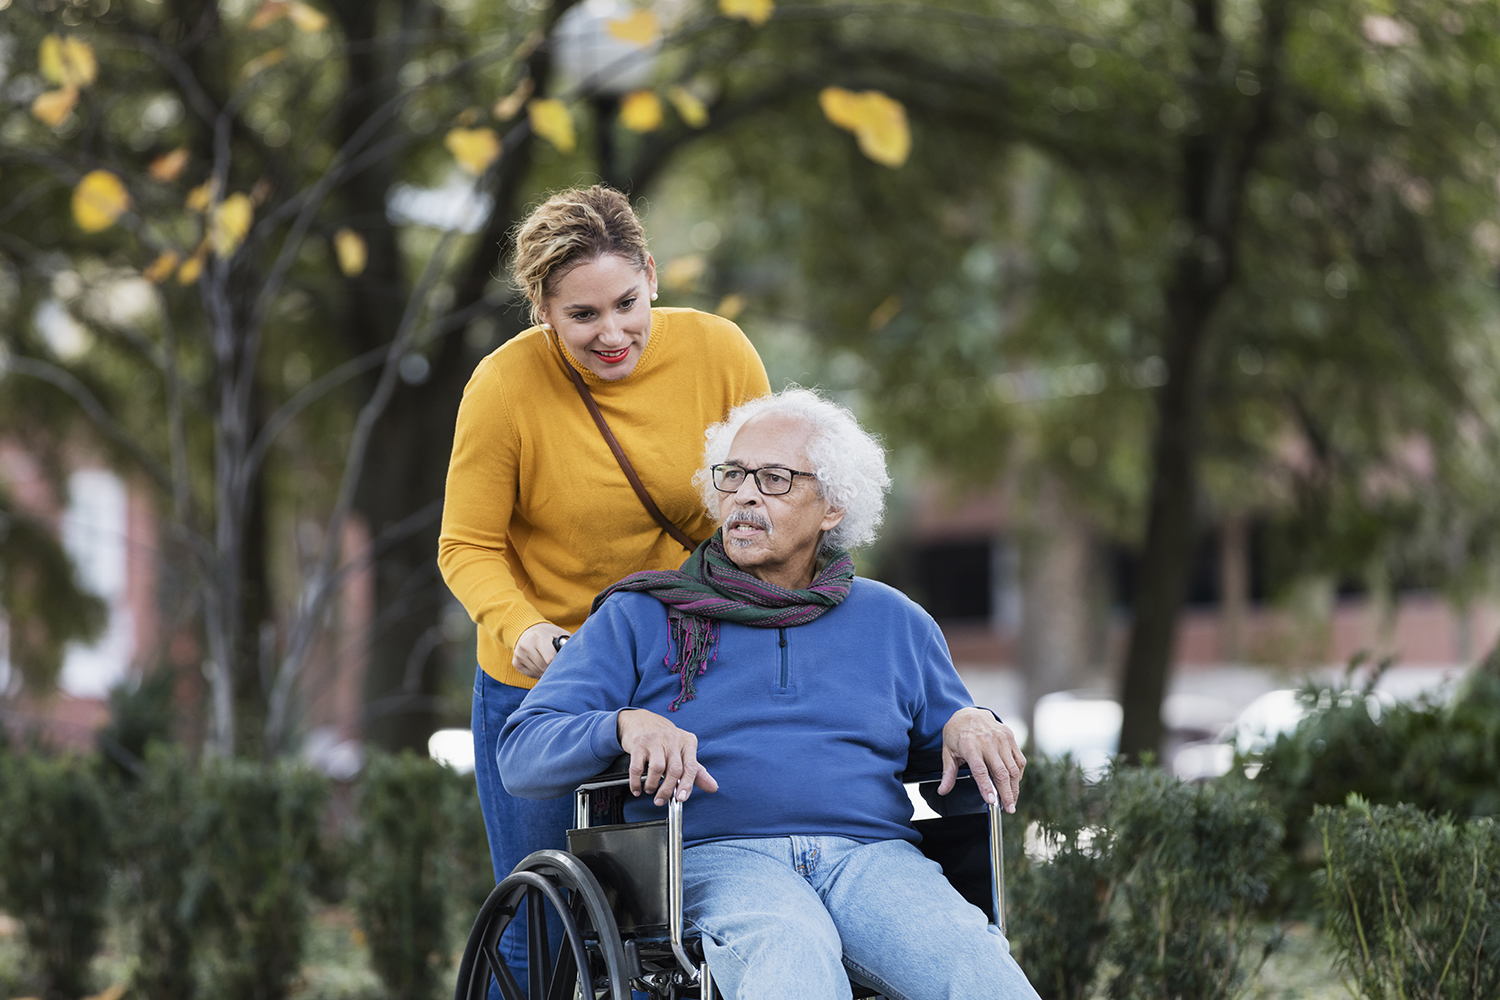 A senior Hispanic man in his 80s sitting in a wheelchair, enjoying a walk in the park with his adult daughter, an adult woman in her 30s.